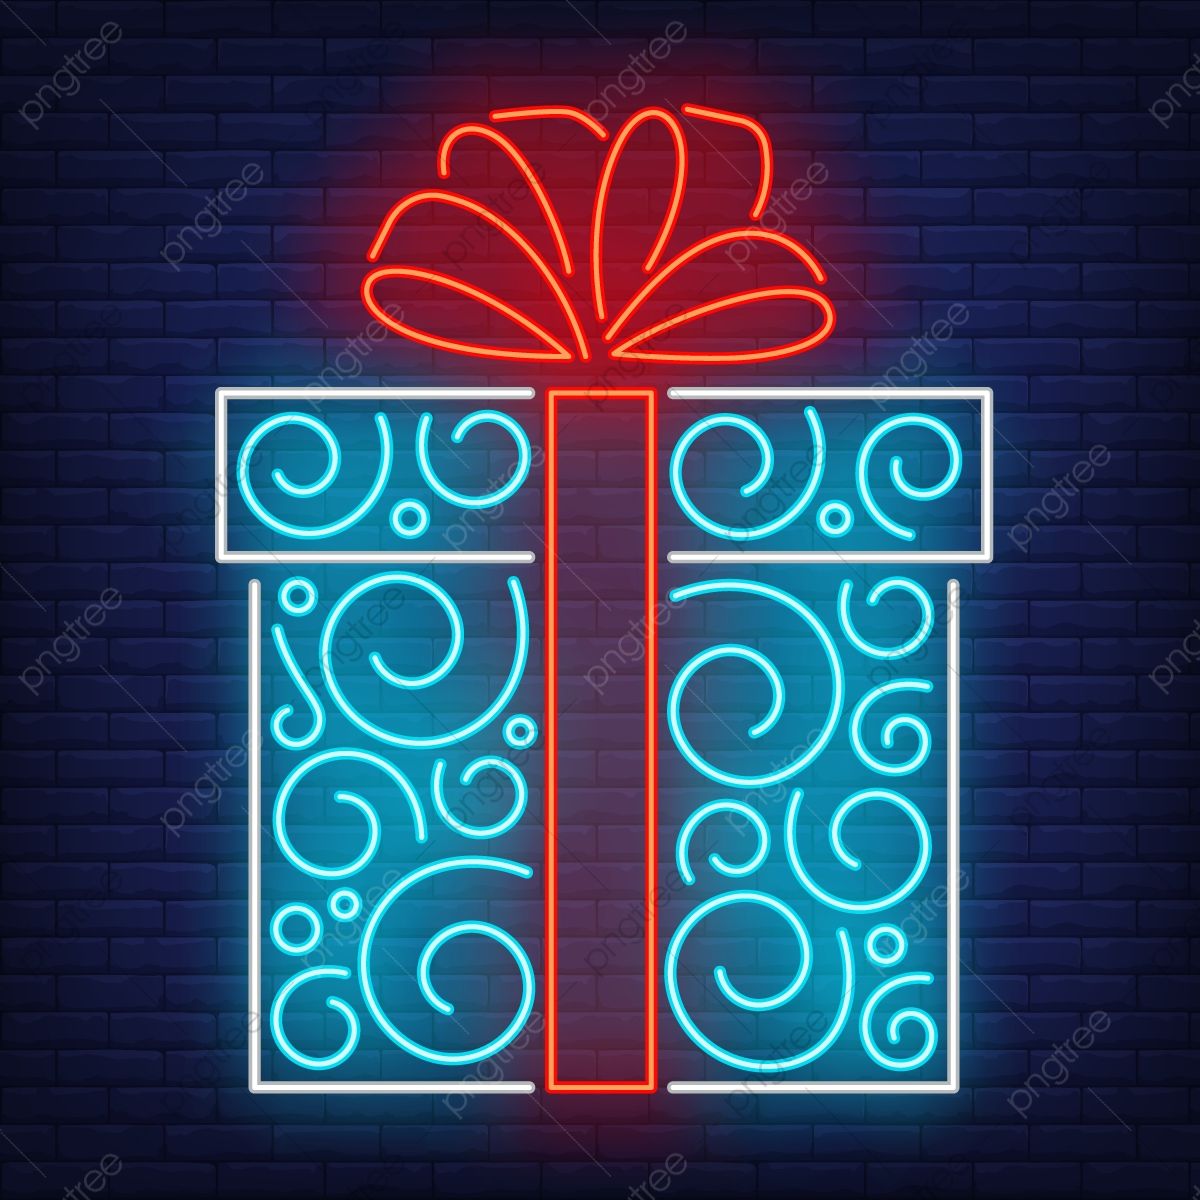 A Neon Gift Of Christmas With Blue Wall, Neon Gift, Christmas Gift, Christmas 2020 PNG and Vector with Transparent Background for Free Download